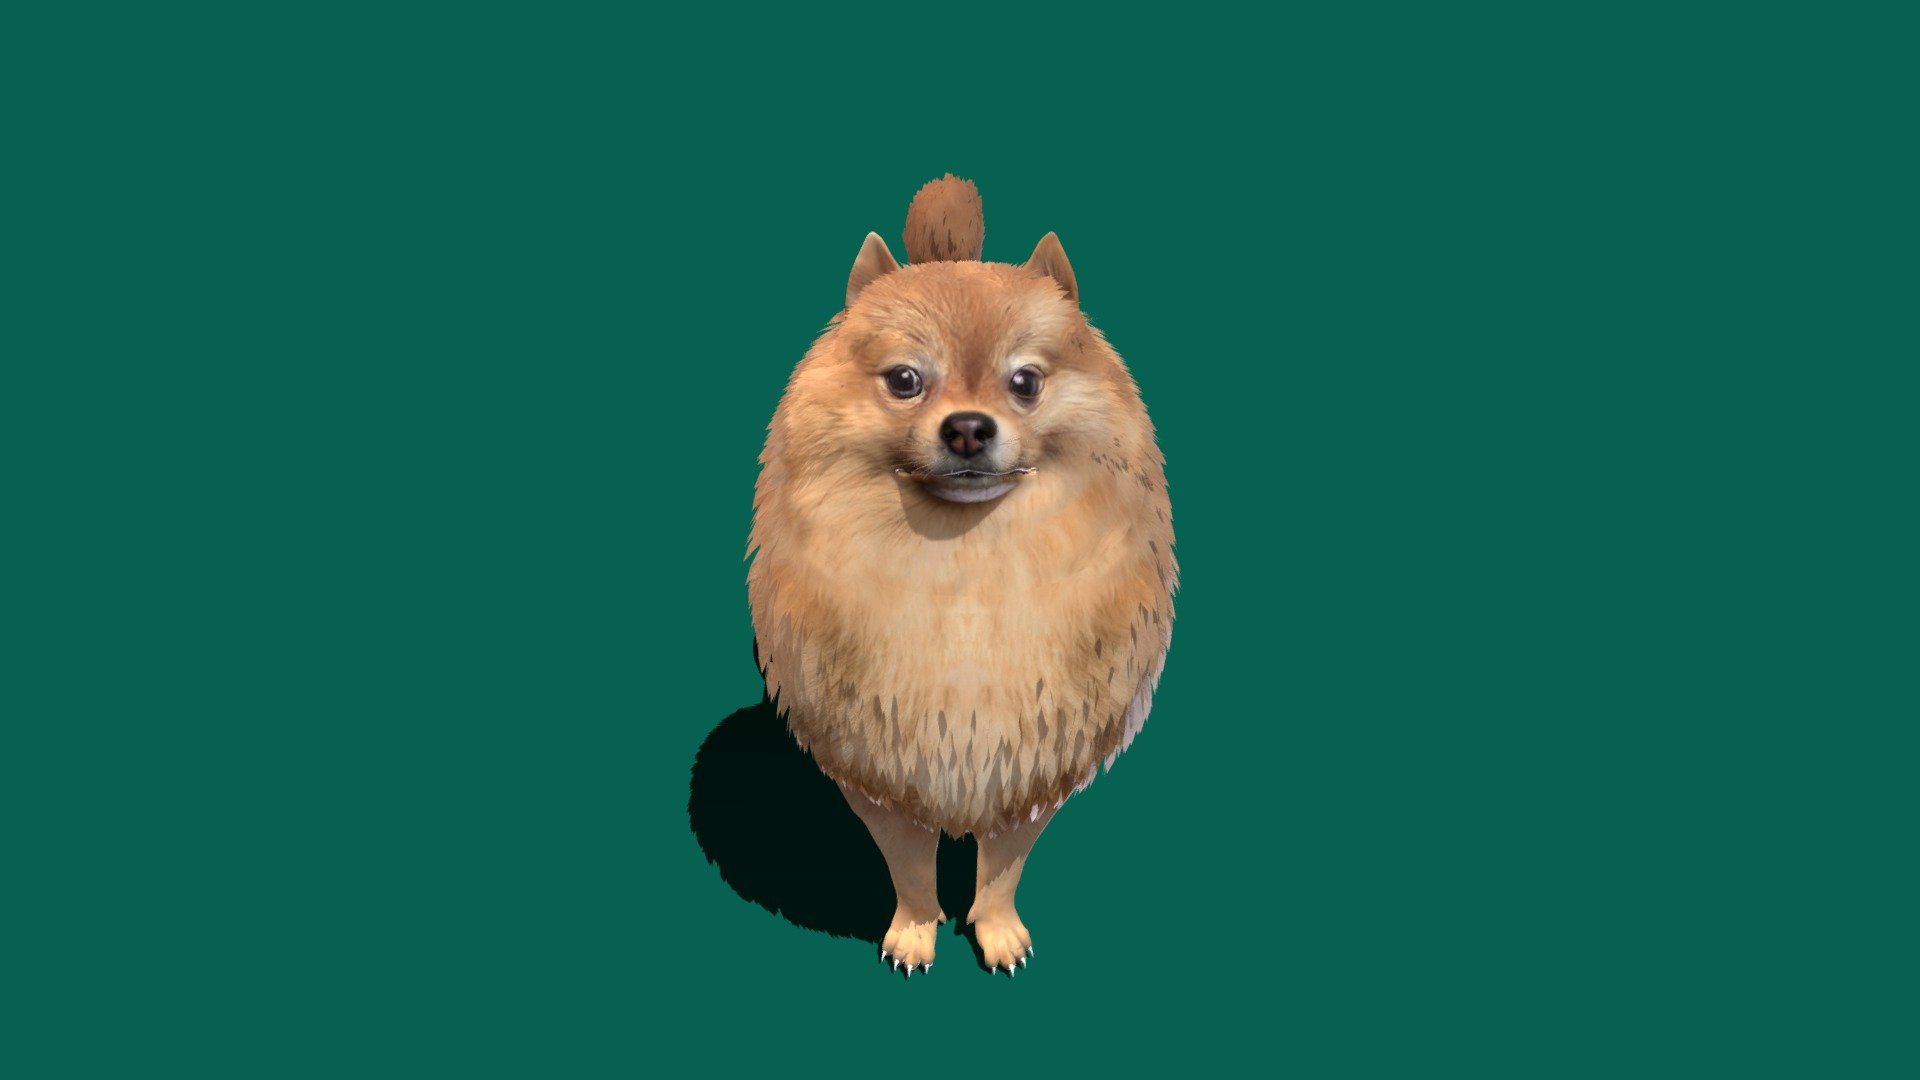 Pomeranian 4K Textures 
 Diffuse 
 Metallic
 Roughness
 Normal Map
 

The Pomeranian is a breed of dog of the Spitz type that is named for the Pomerania region in north-west Poland and north-east Germany in Central Europe. Classed as a toy dog breed because of its small size, the Pomeranian is descended from larger Spitz-type dogs, specifically the German Spitz 3d model